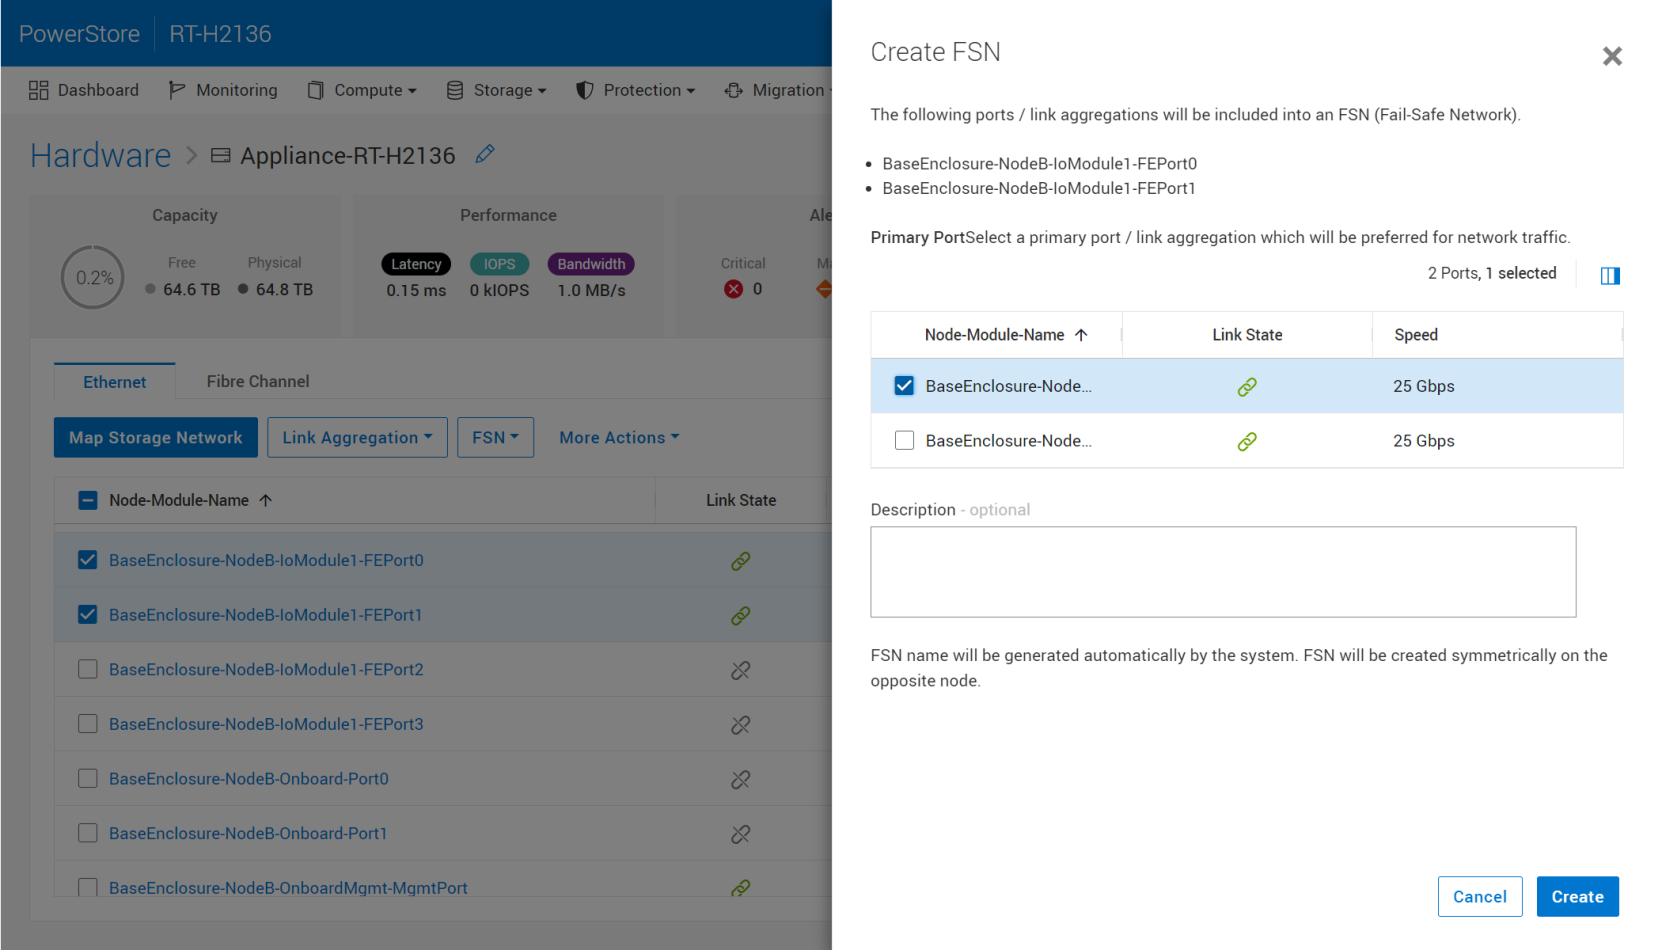 A screenshot of PowerStore Manager showing the create FSN page and the ability to designate one port as primary.